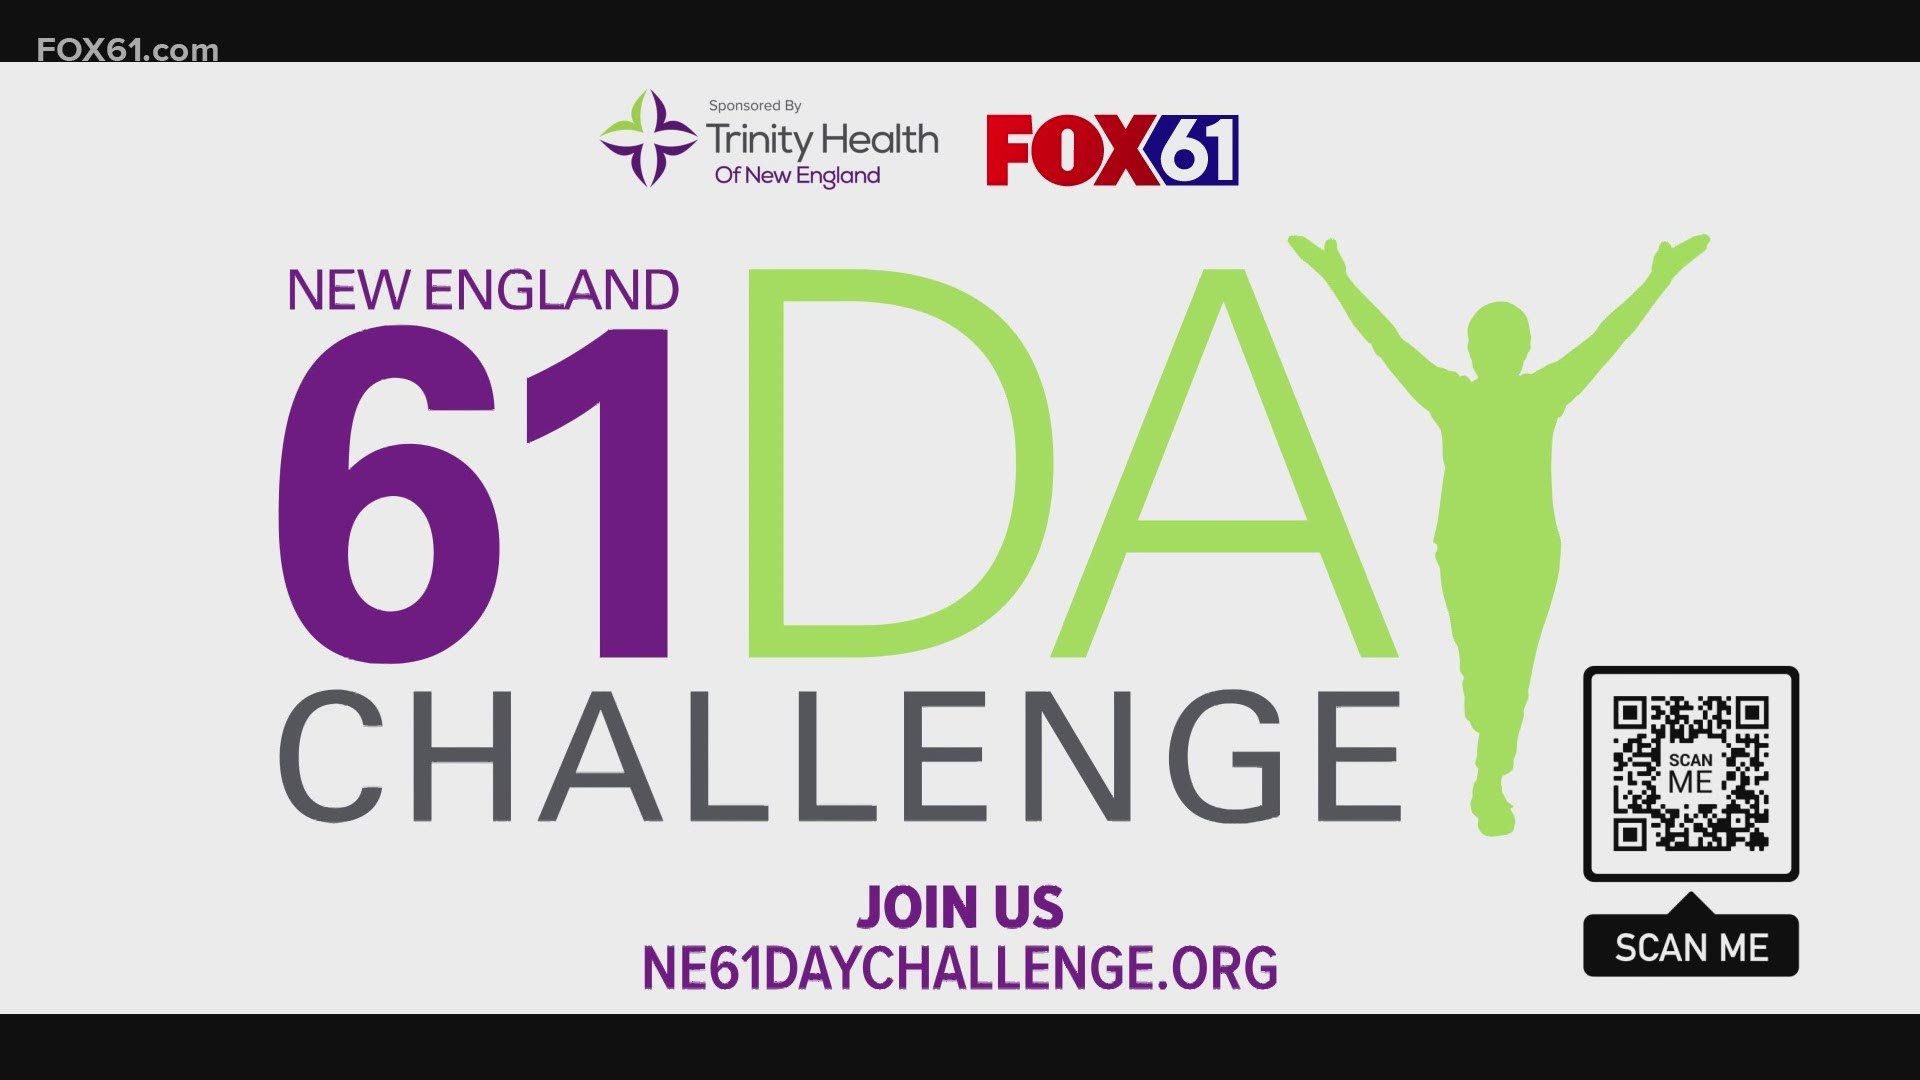 We're teaming up with Trinity Health of New England again for a very different challenge. This year's all about mindfulness and healing your body and spirit.